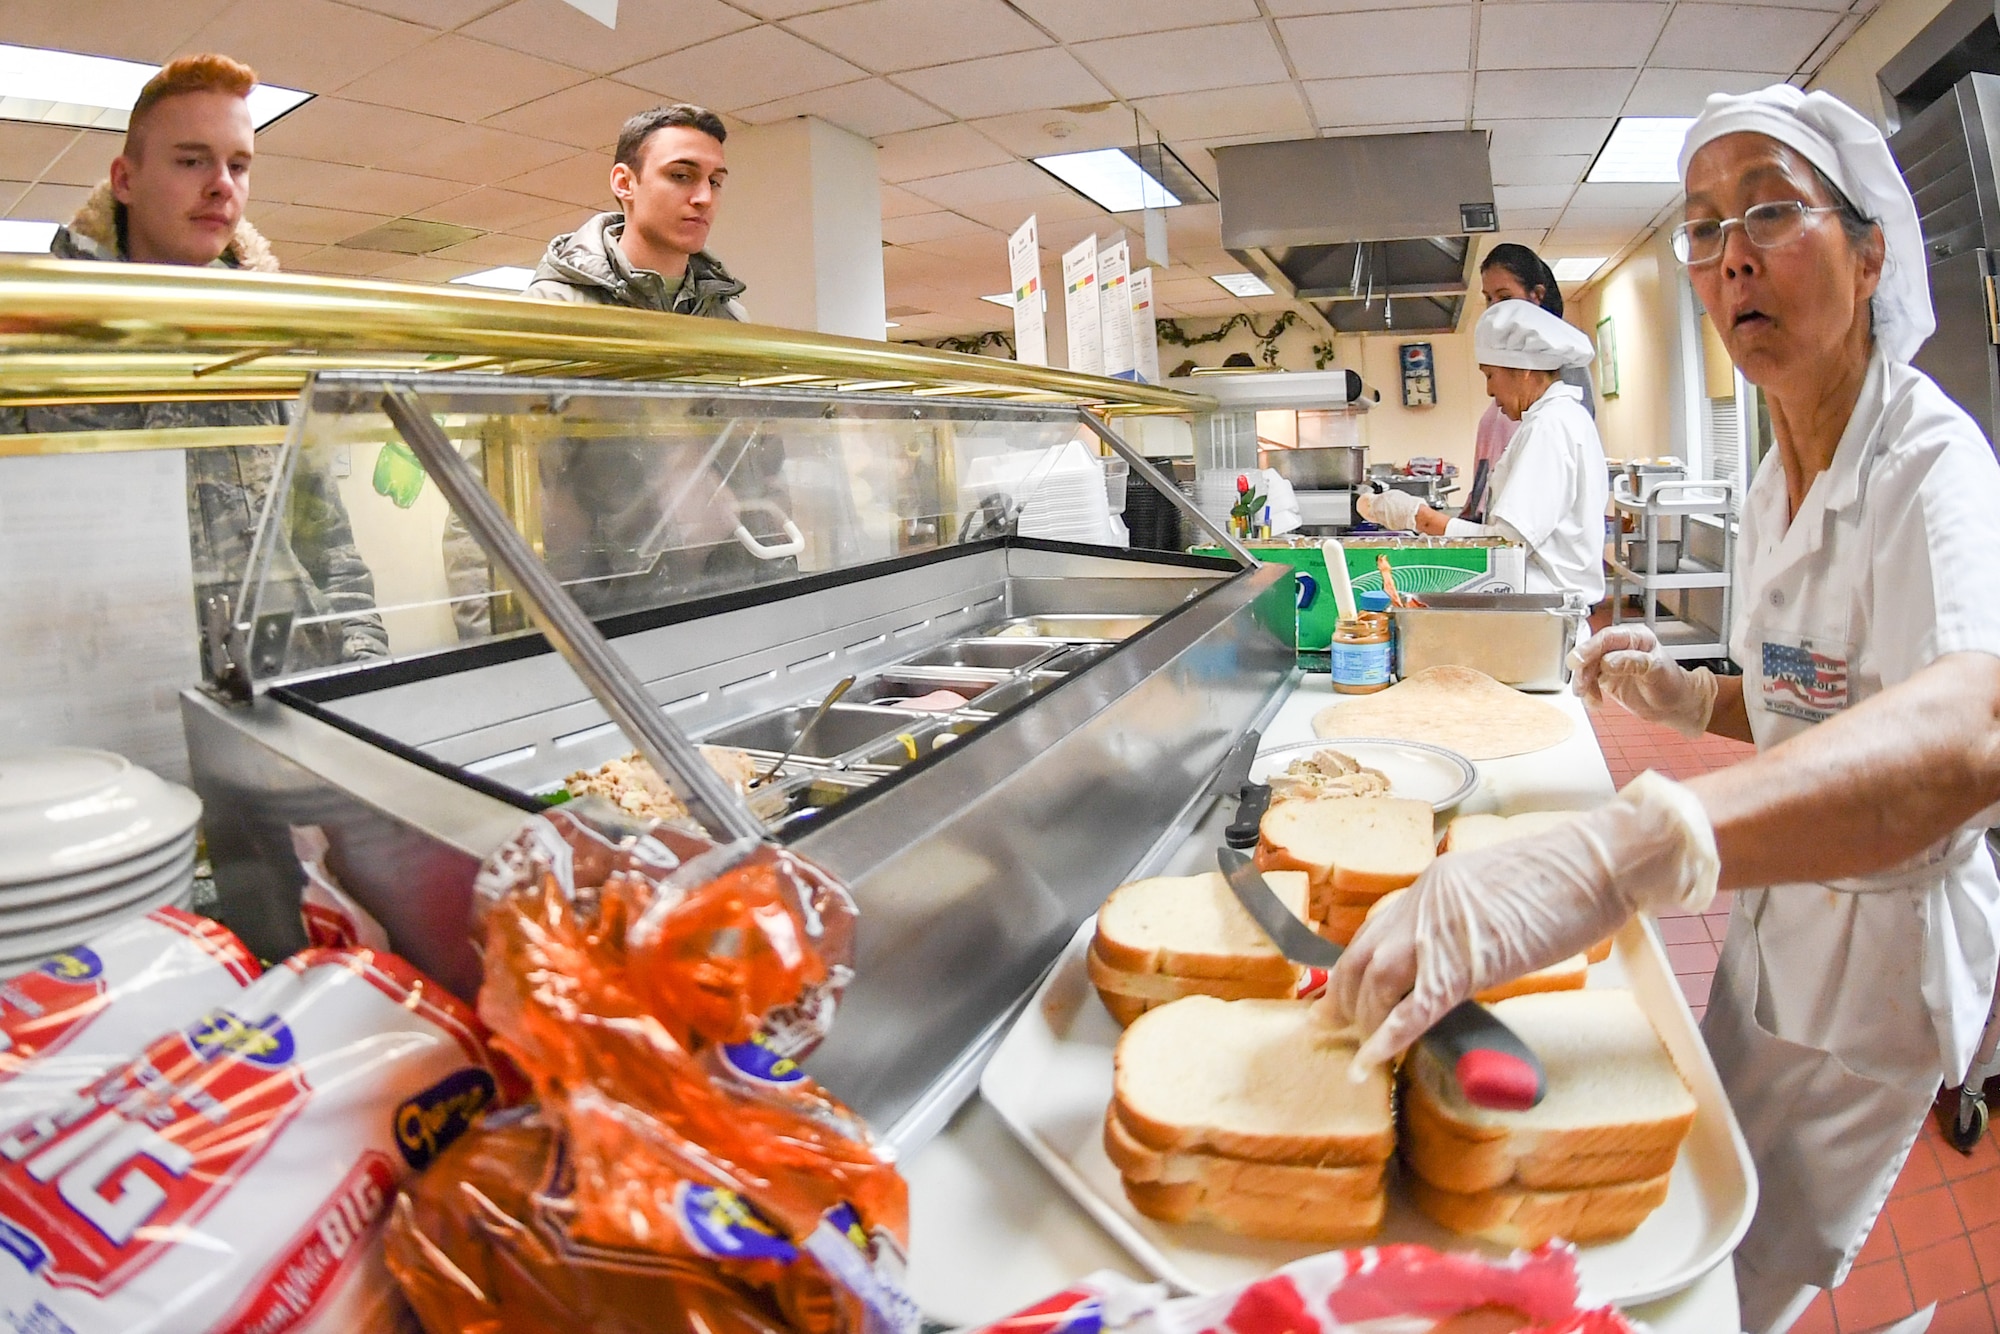 The Hillcrest Dining Facility at Hill Force Base, Utah, is offering an additional meal service from 11:30 p.m. to midnight Monday-Friday. The meal service is open to active-duty military or members on orders with an authorized identification. Payments can be made with a meal card or cash. Debit and credit cards cannot be accepted. For more information, call 801-777-3428. (U.S. Air Force photo by Cynthia Griggs)